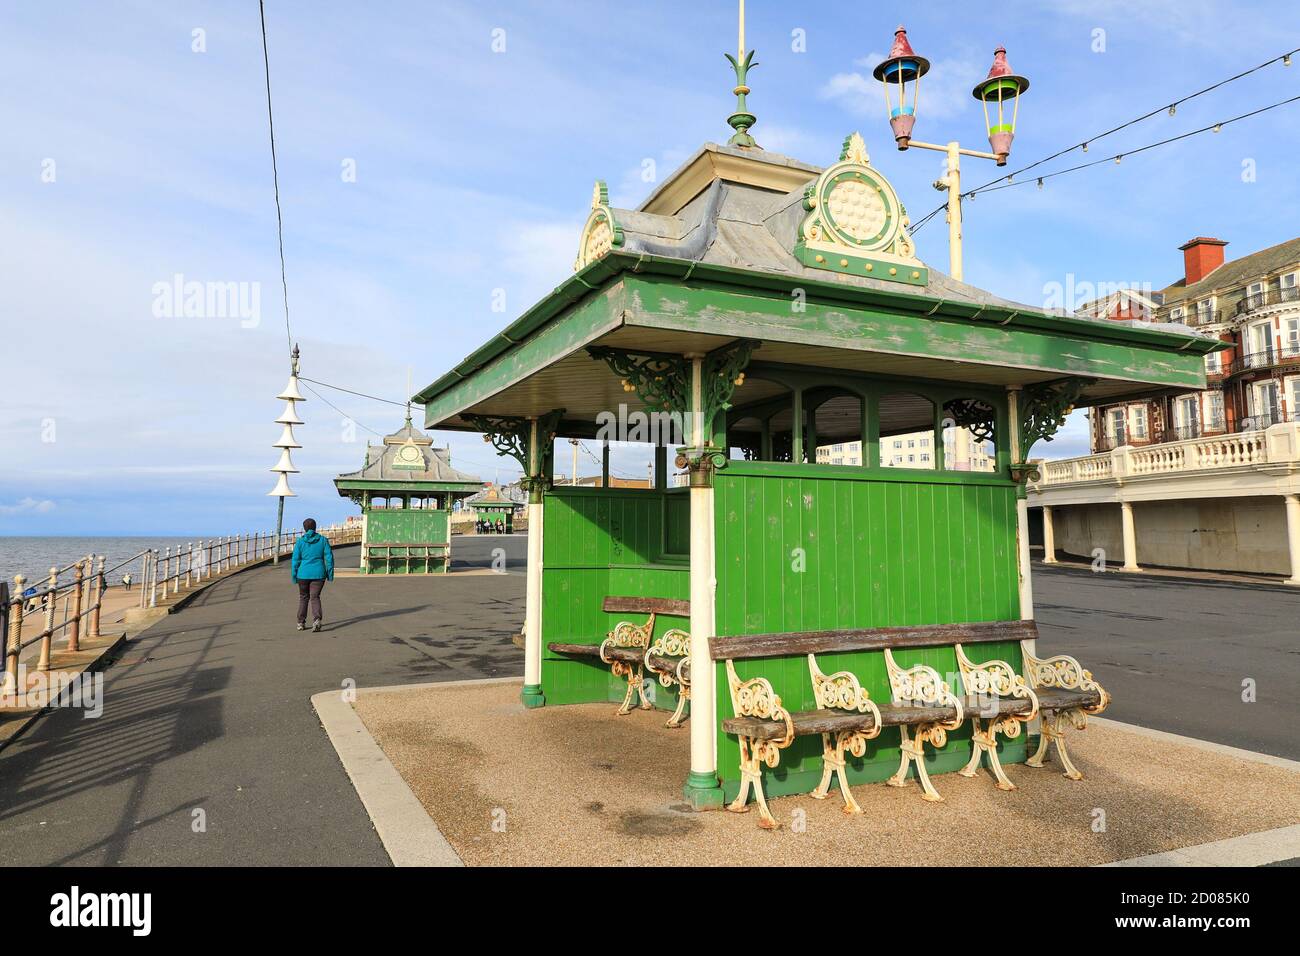 A Victorian public shelter on the Promenade on the seafront at Blackpool, Lancashire, England, UK Stock Photo